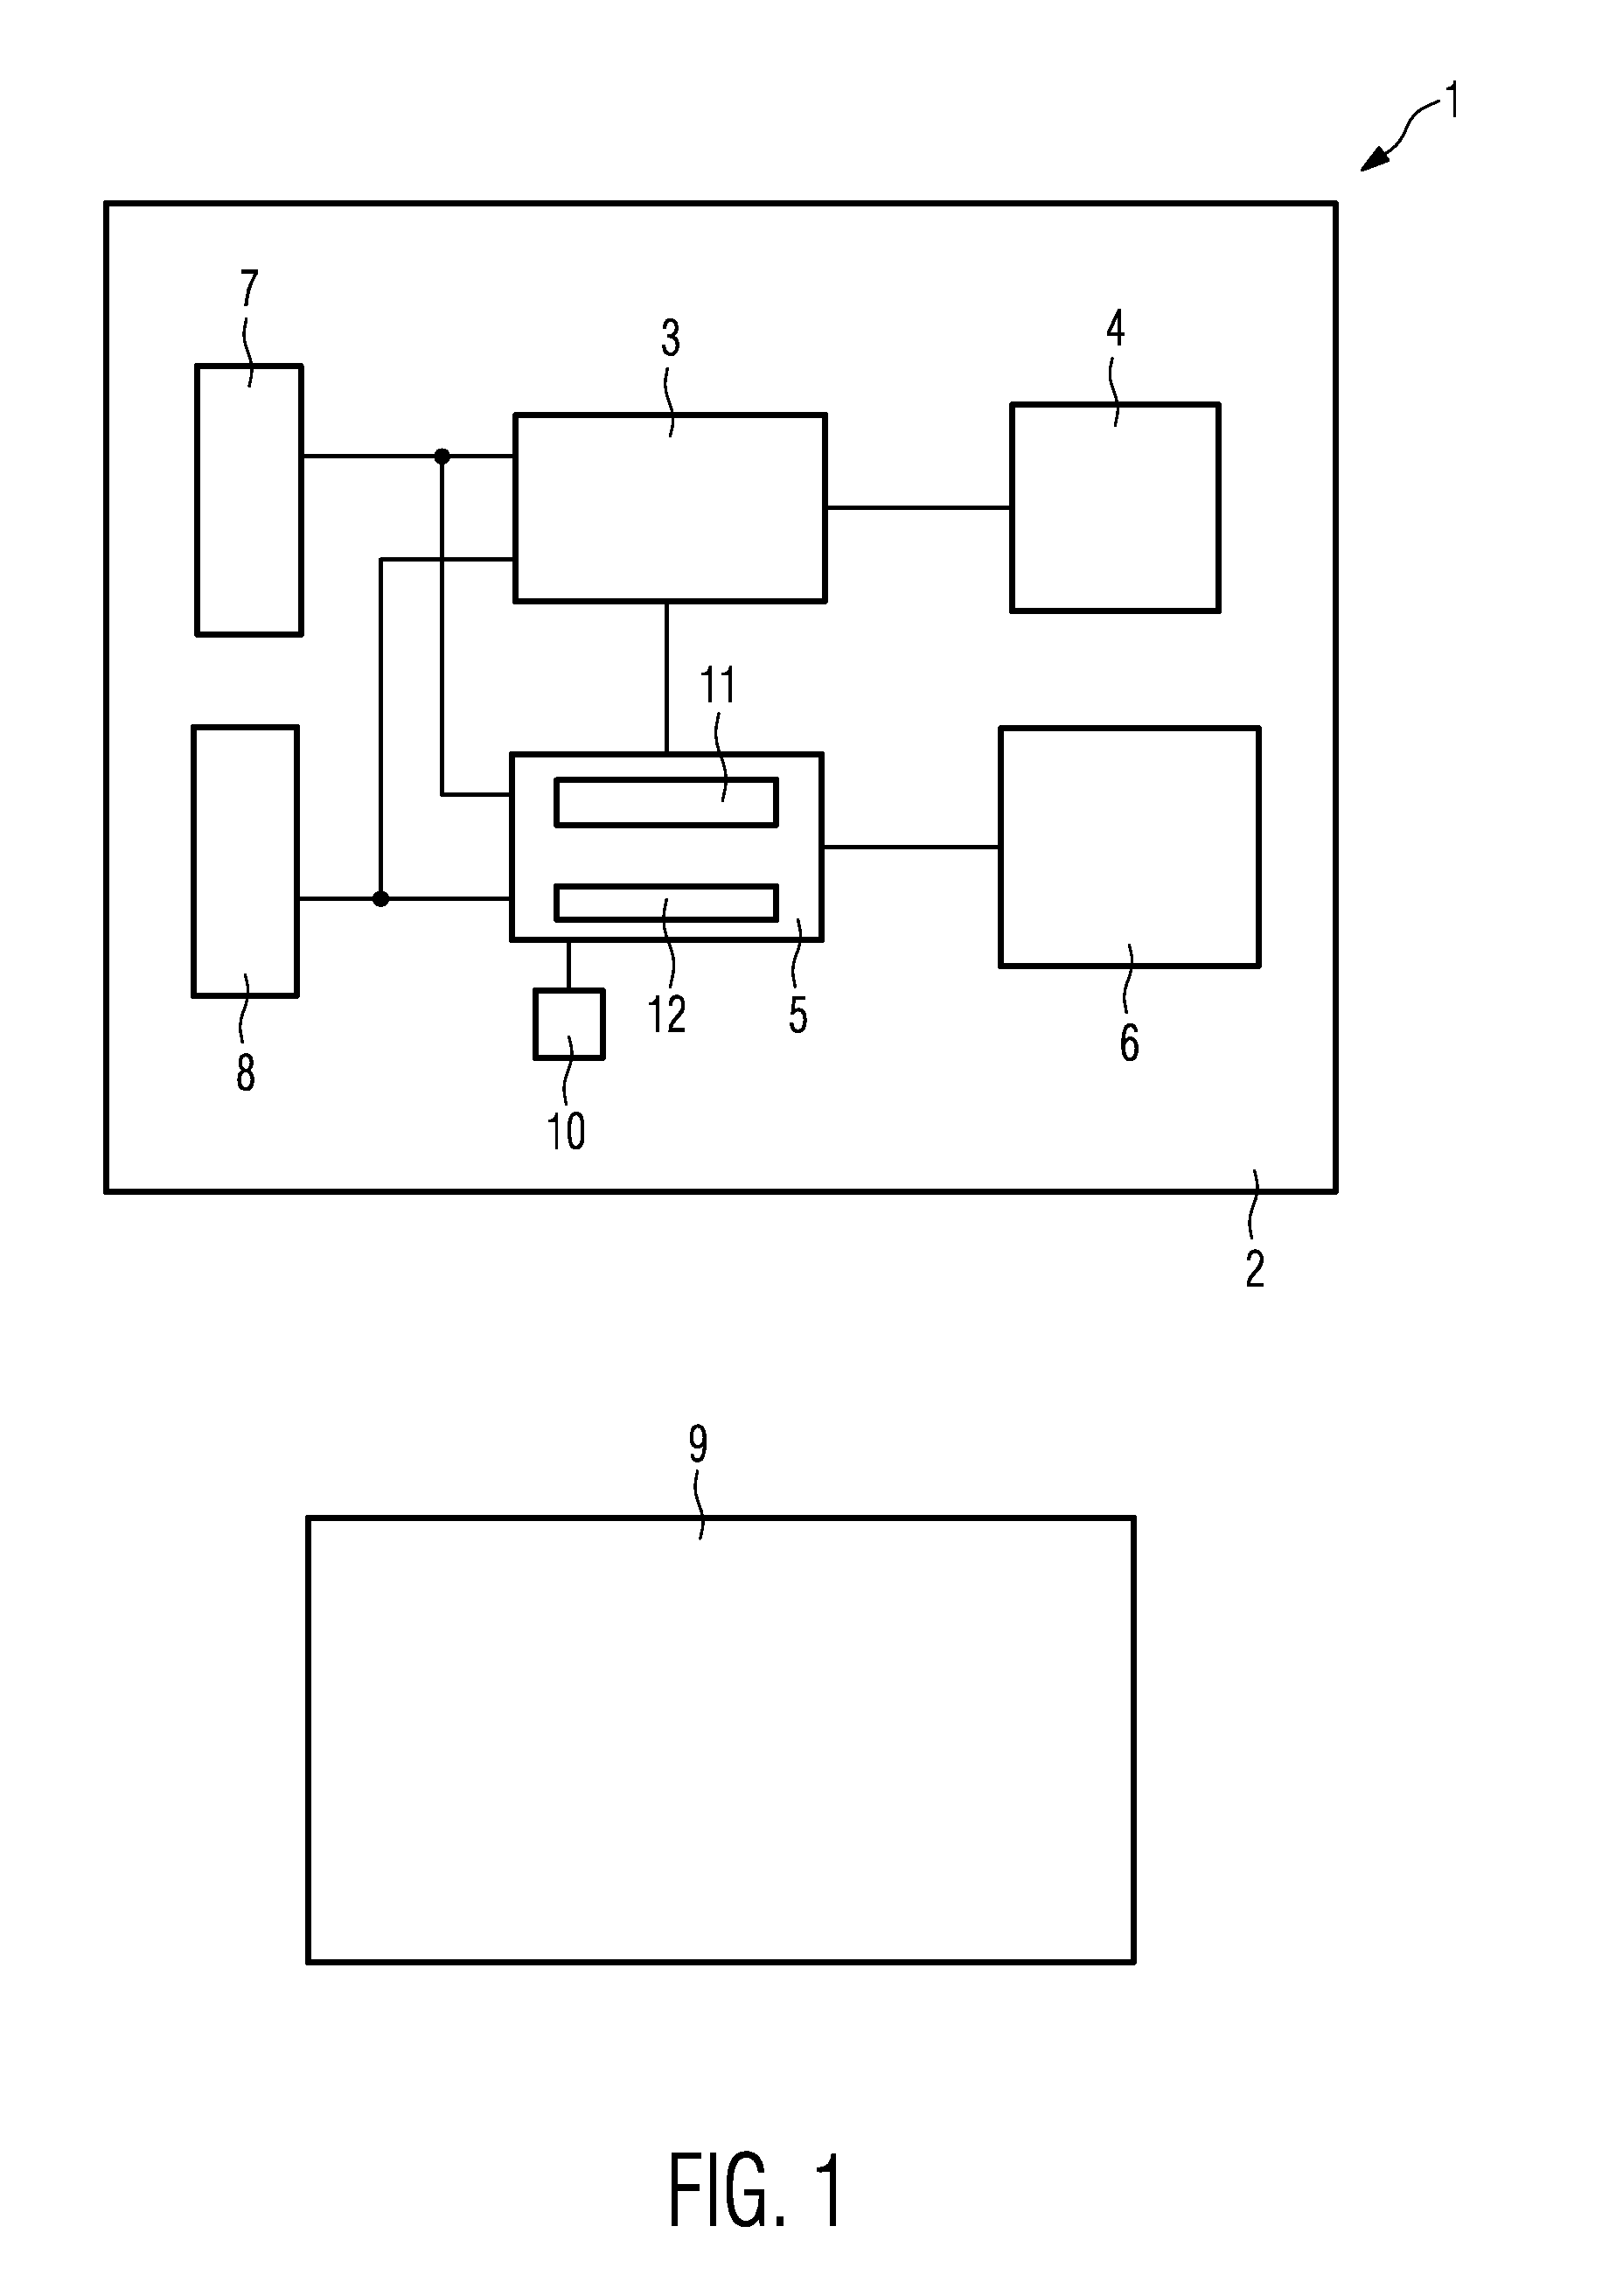 Chip card comprising a display